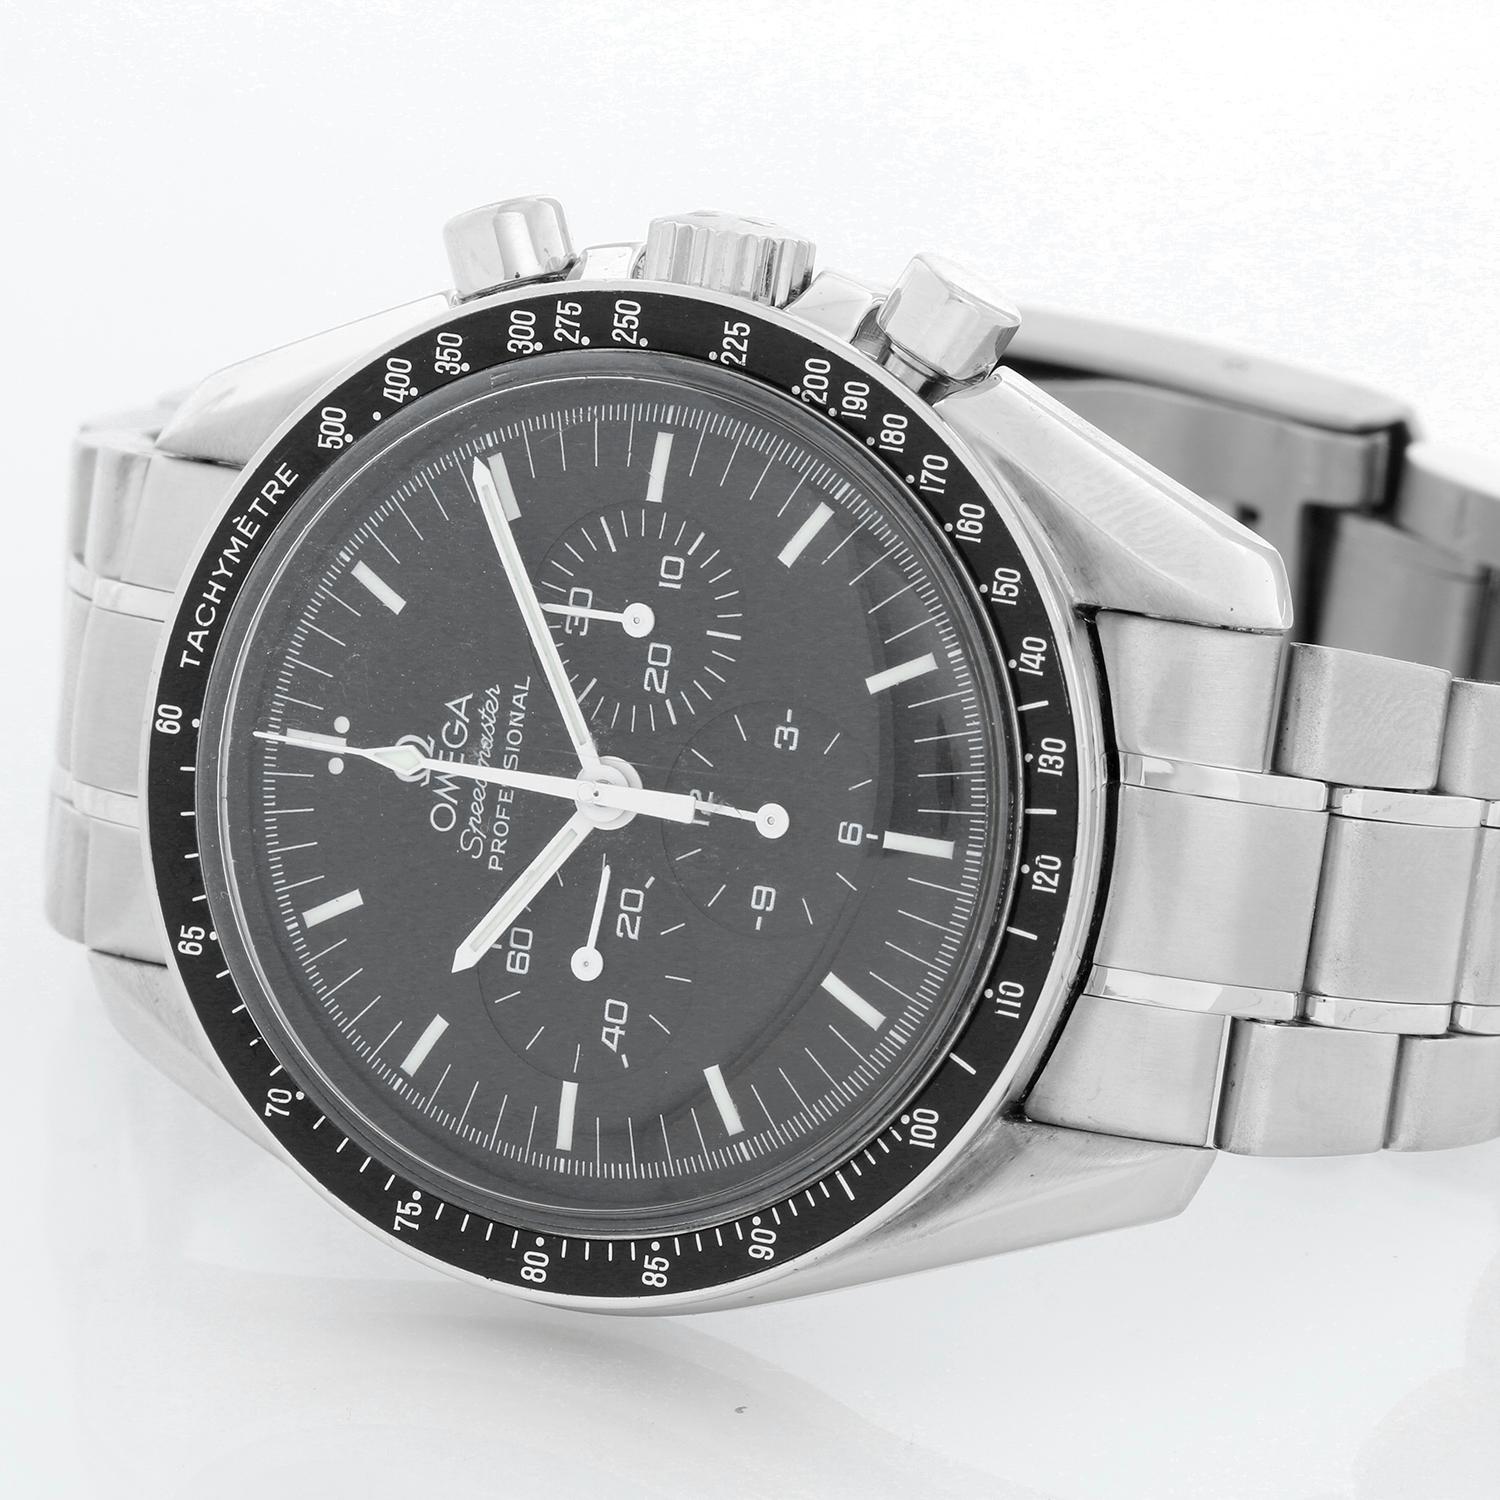 Omega Speedmaster Moonwatch Professional Chronograph 42 mm - Manual winding; chronograph. Stainless steel case, bezel and crown; exposition back  (42mm diameter). Black dial; minutes and seconds recorders;. Stainless steel bracelet with deployant